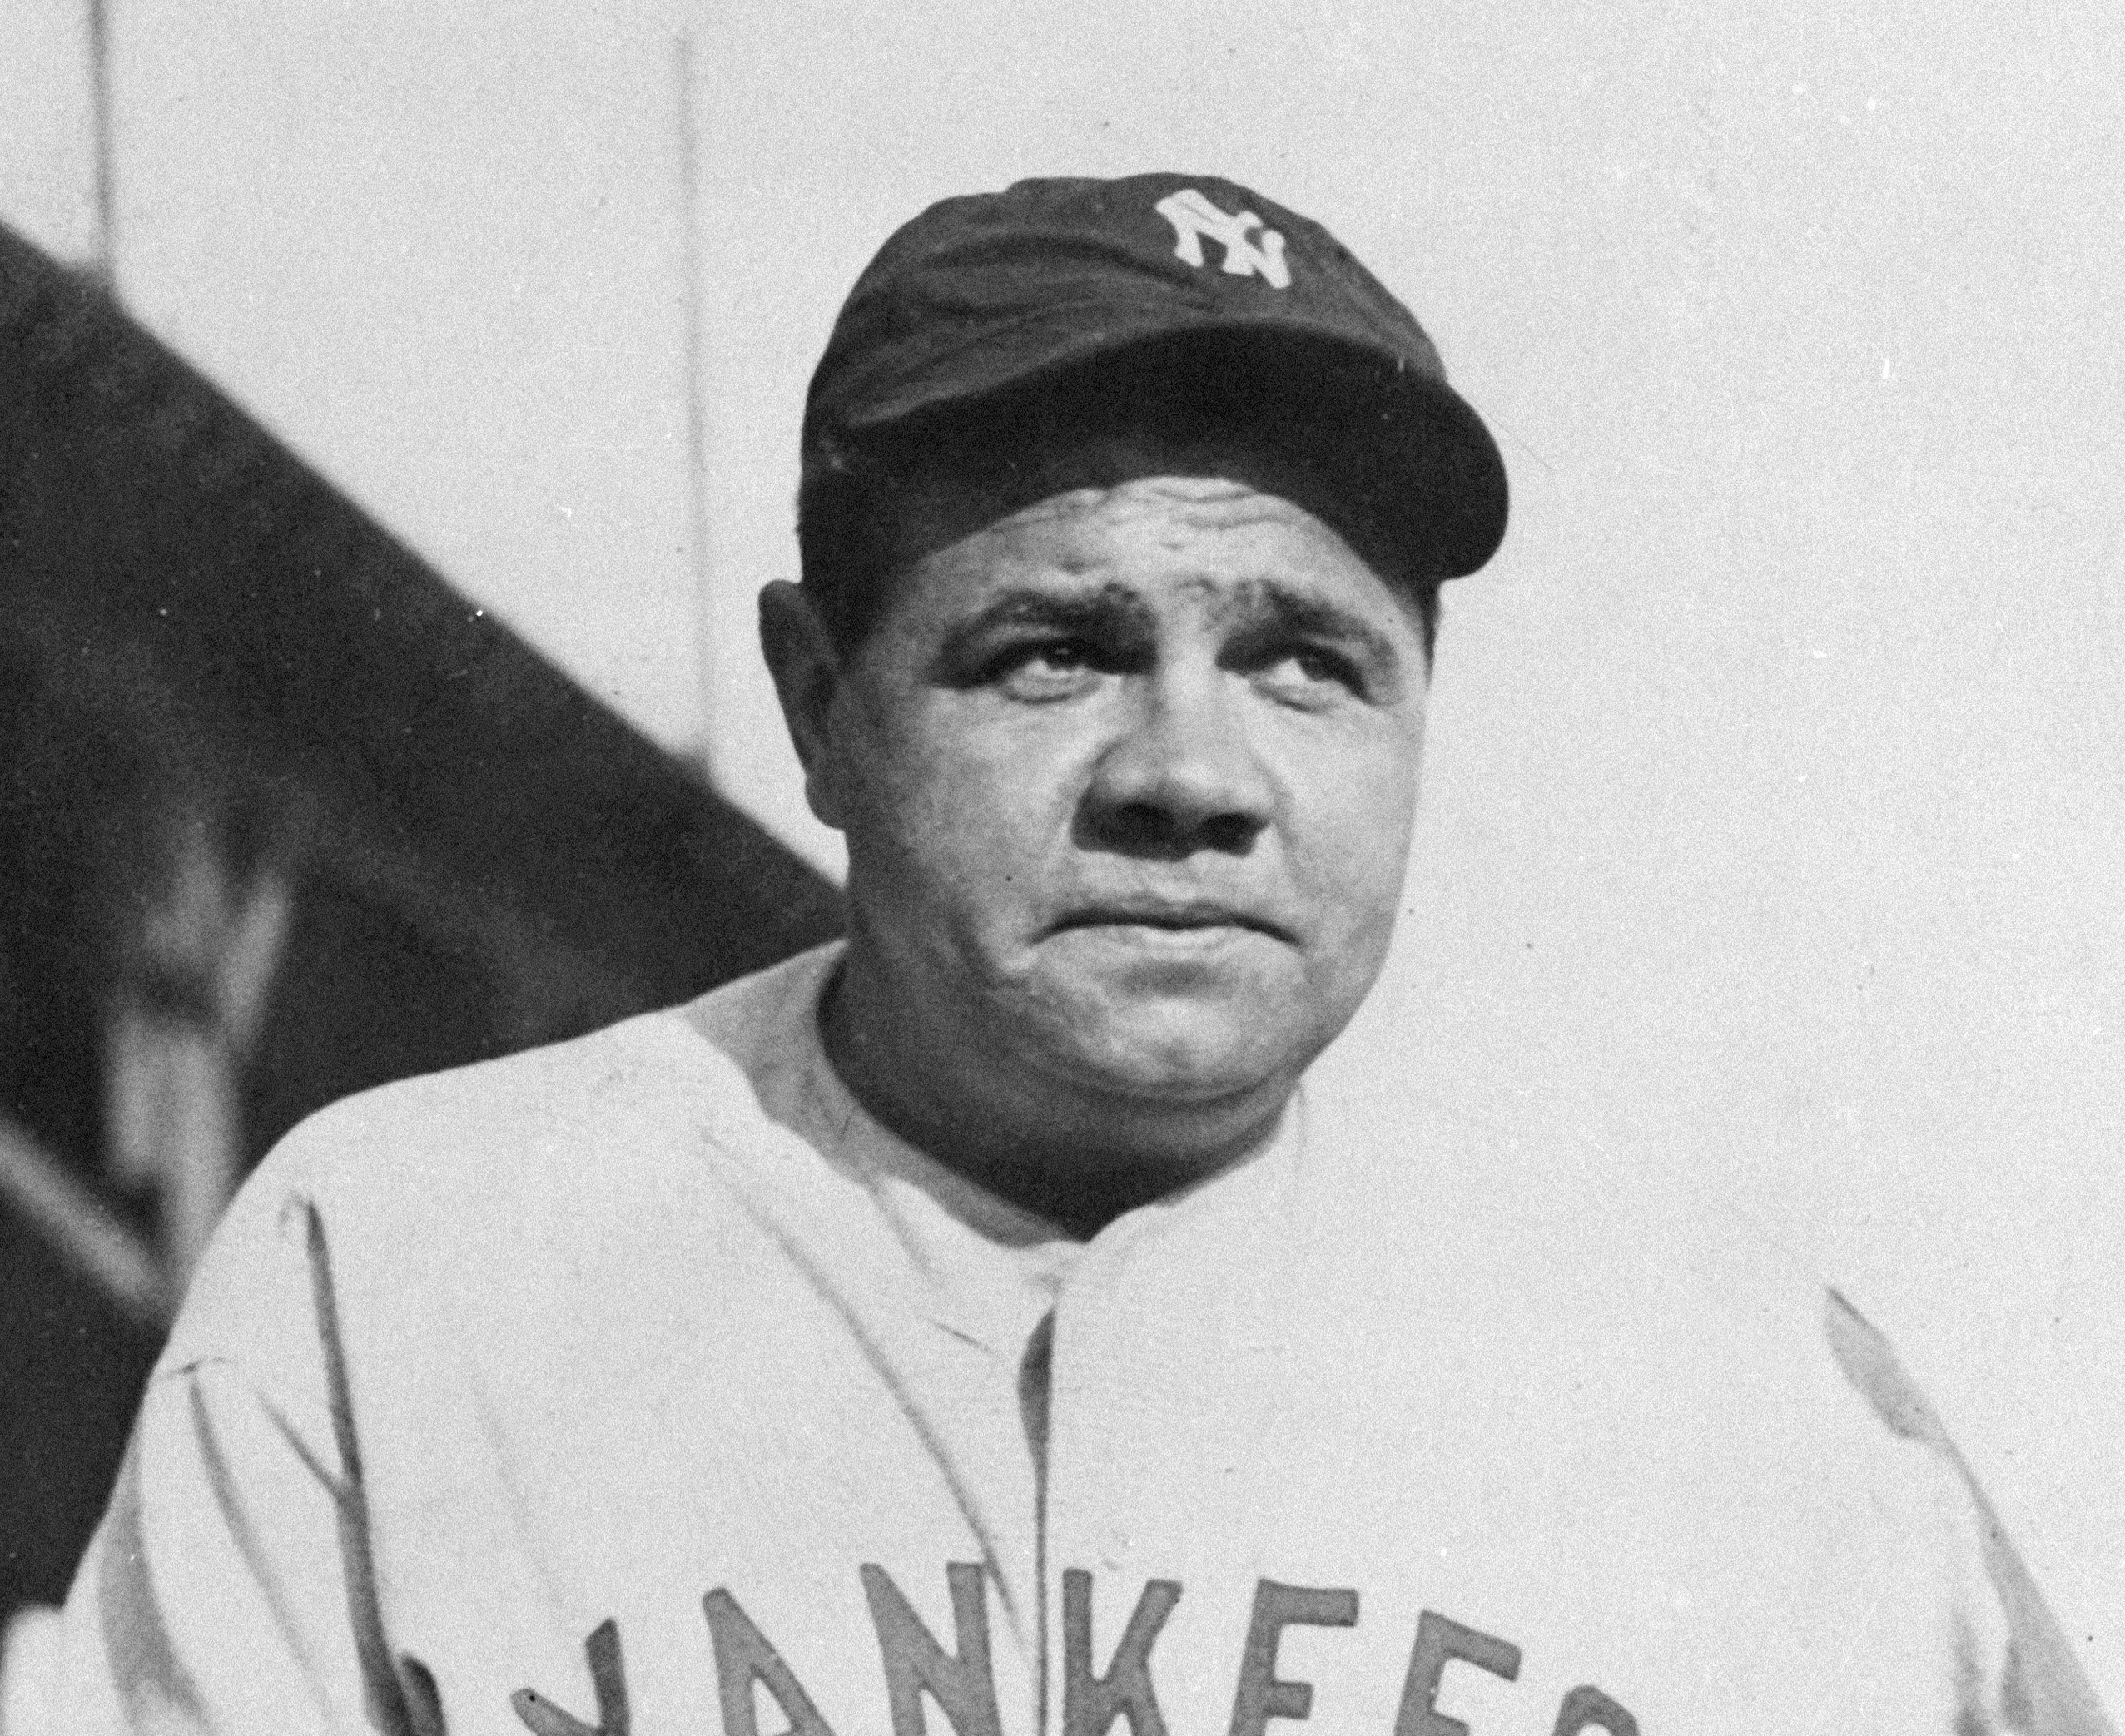 Babe Ruth bat sells at auction for $156,000 - The Boston Globe